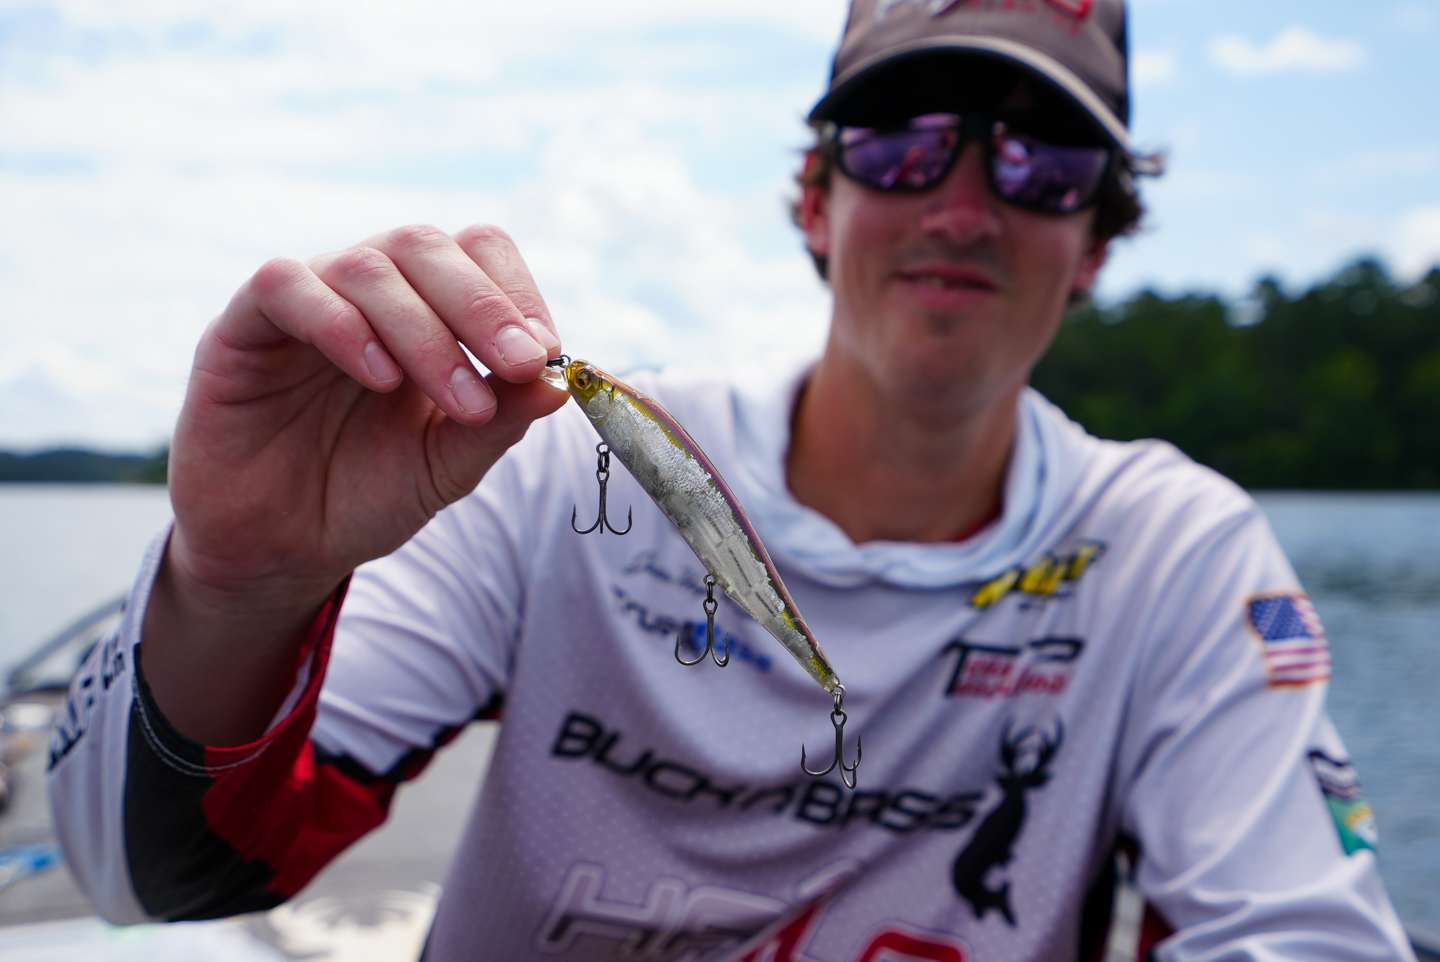 The Ito Shiner's profile is what Hamner likes this most about this unique jerkbait. 